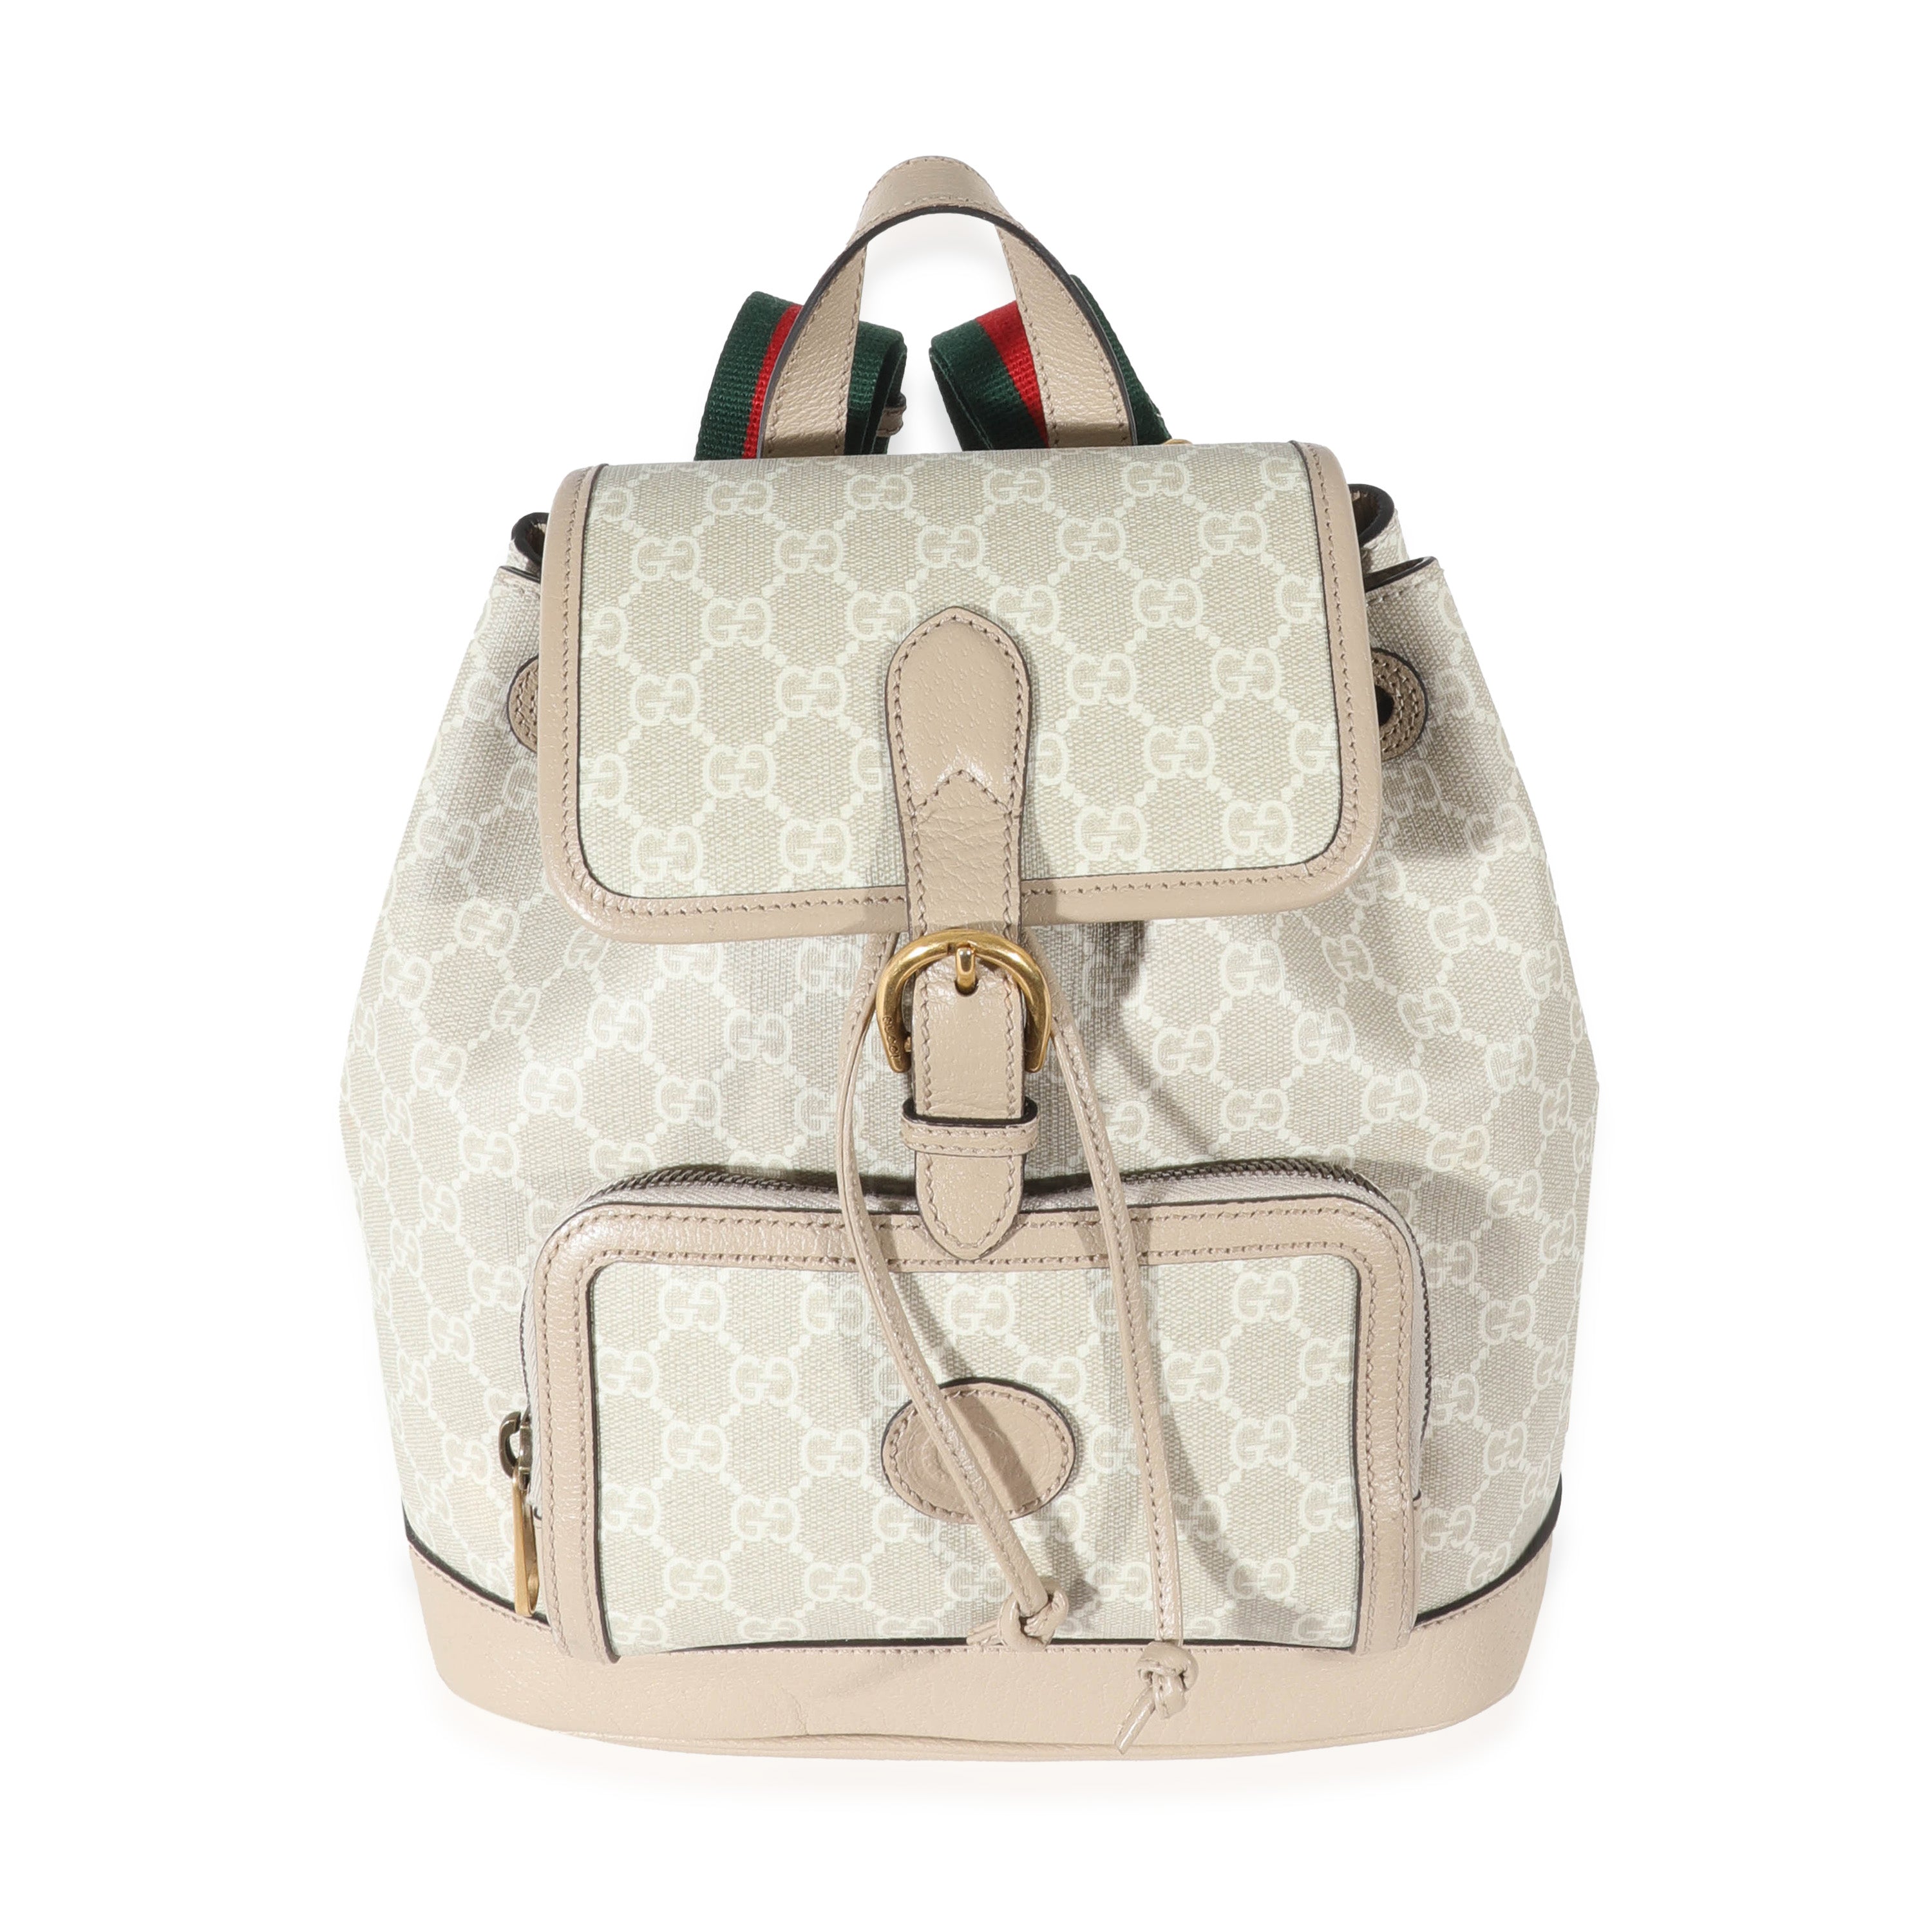 Louis Vuitton - Monogram Eclipse Discovery Backpack PM - Catawiki